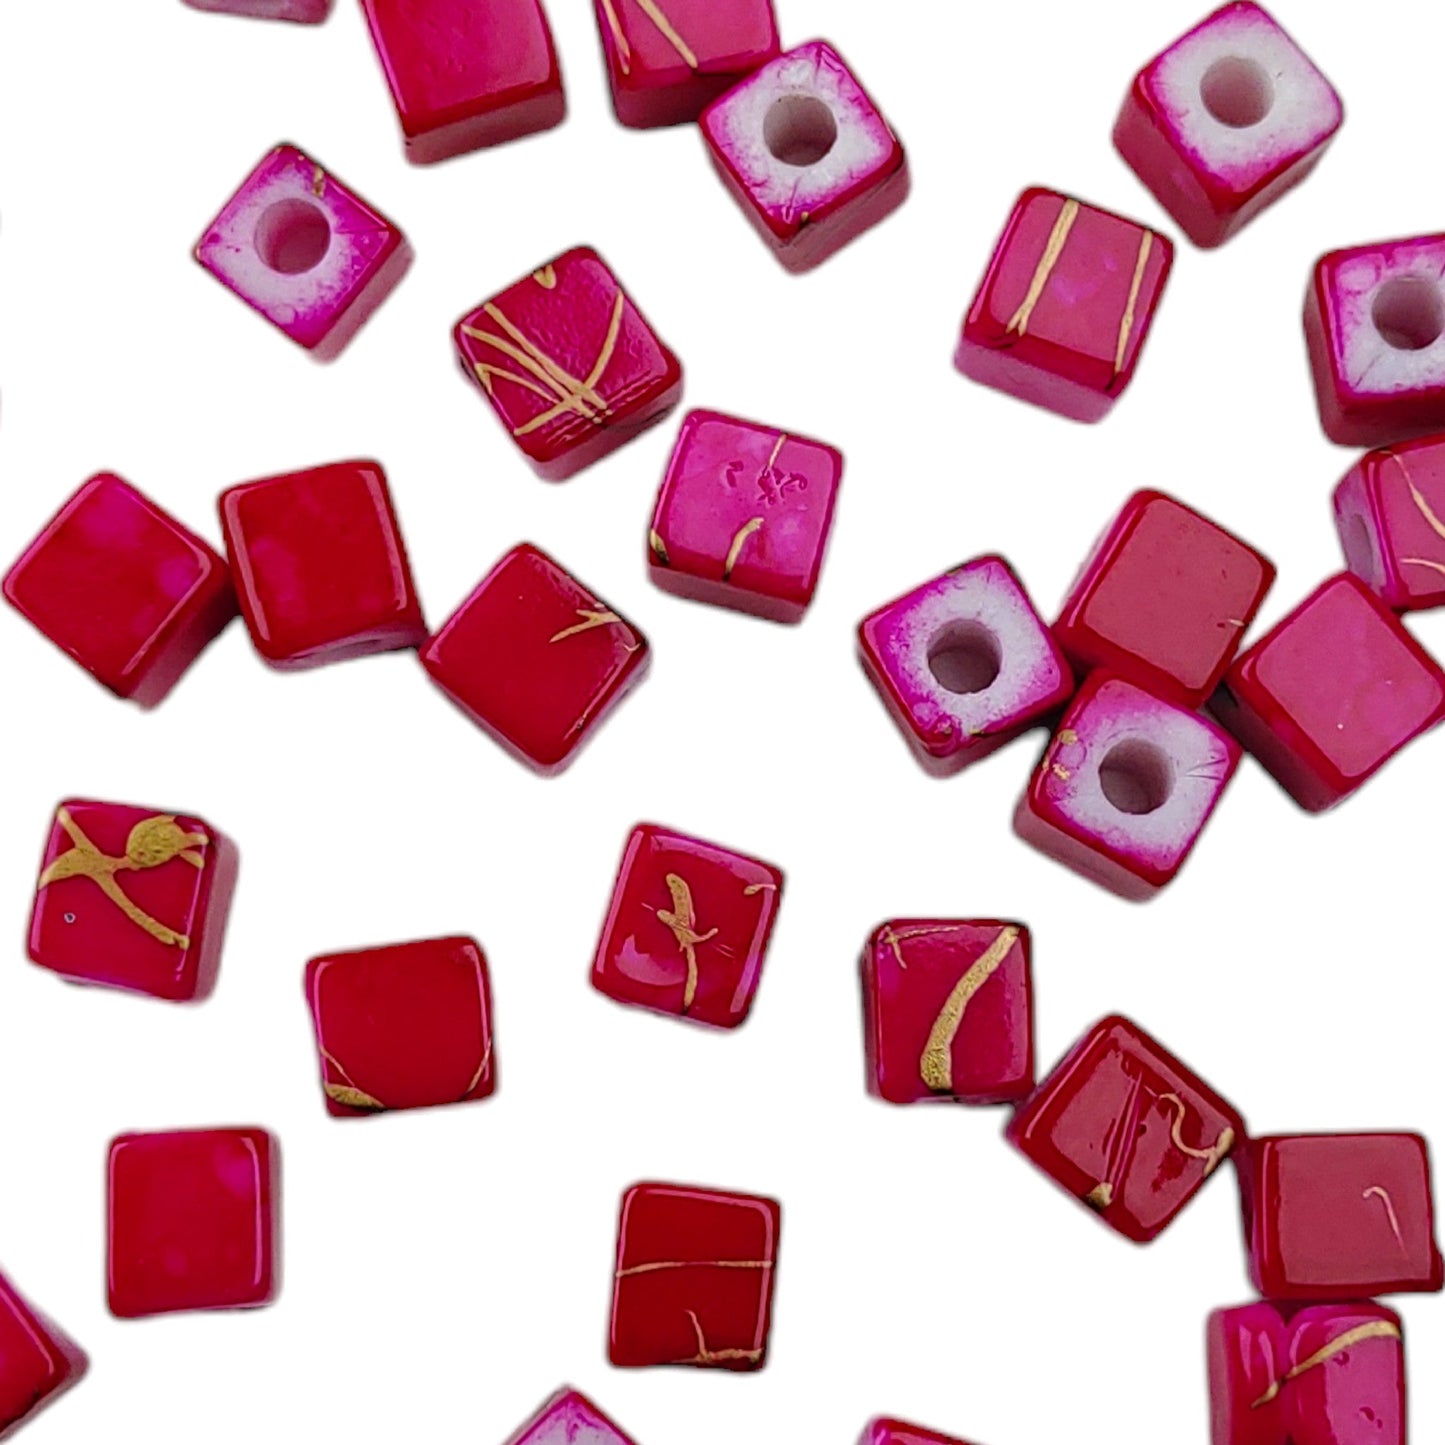 Indian Petals Square Shape Designer Colored Motif Beads For Craft or décor -11701